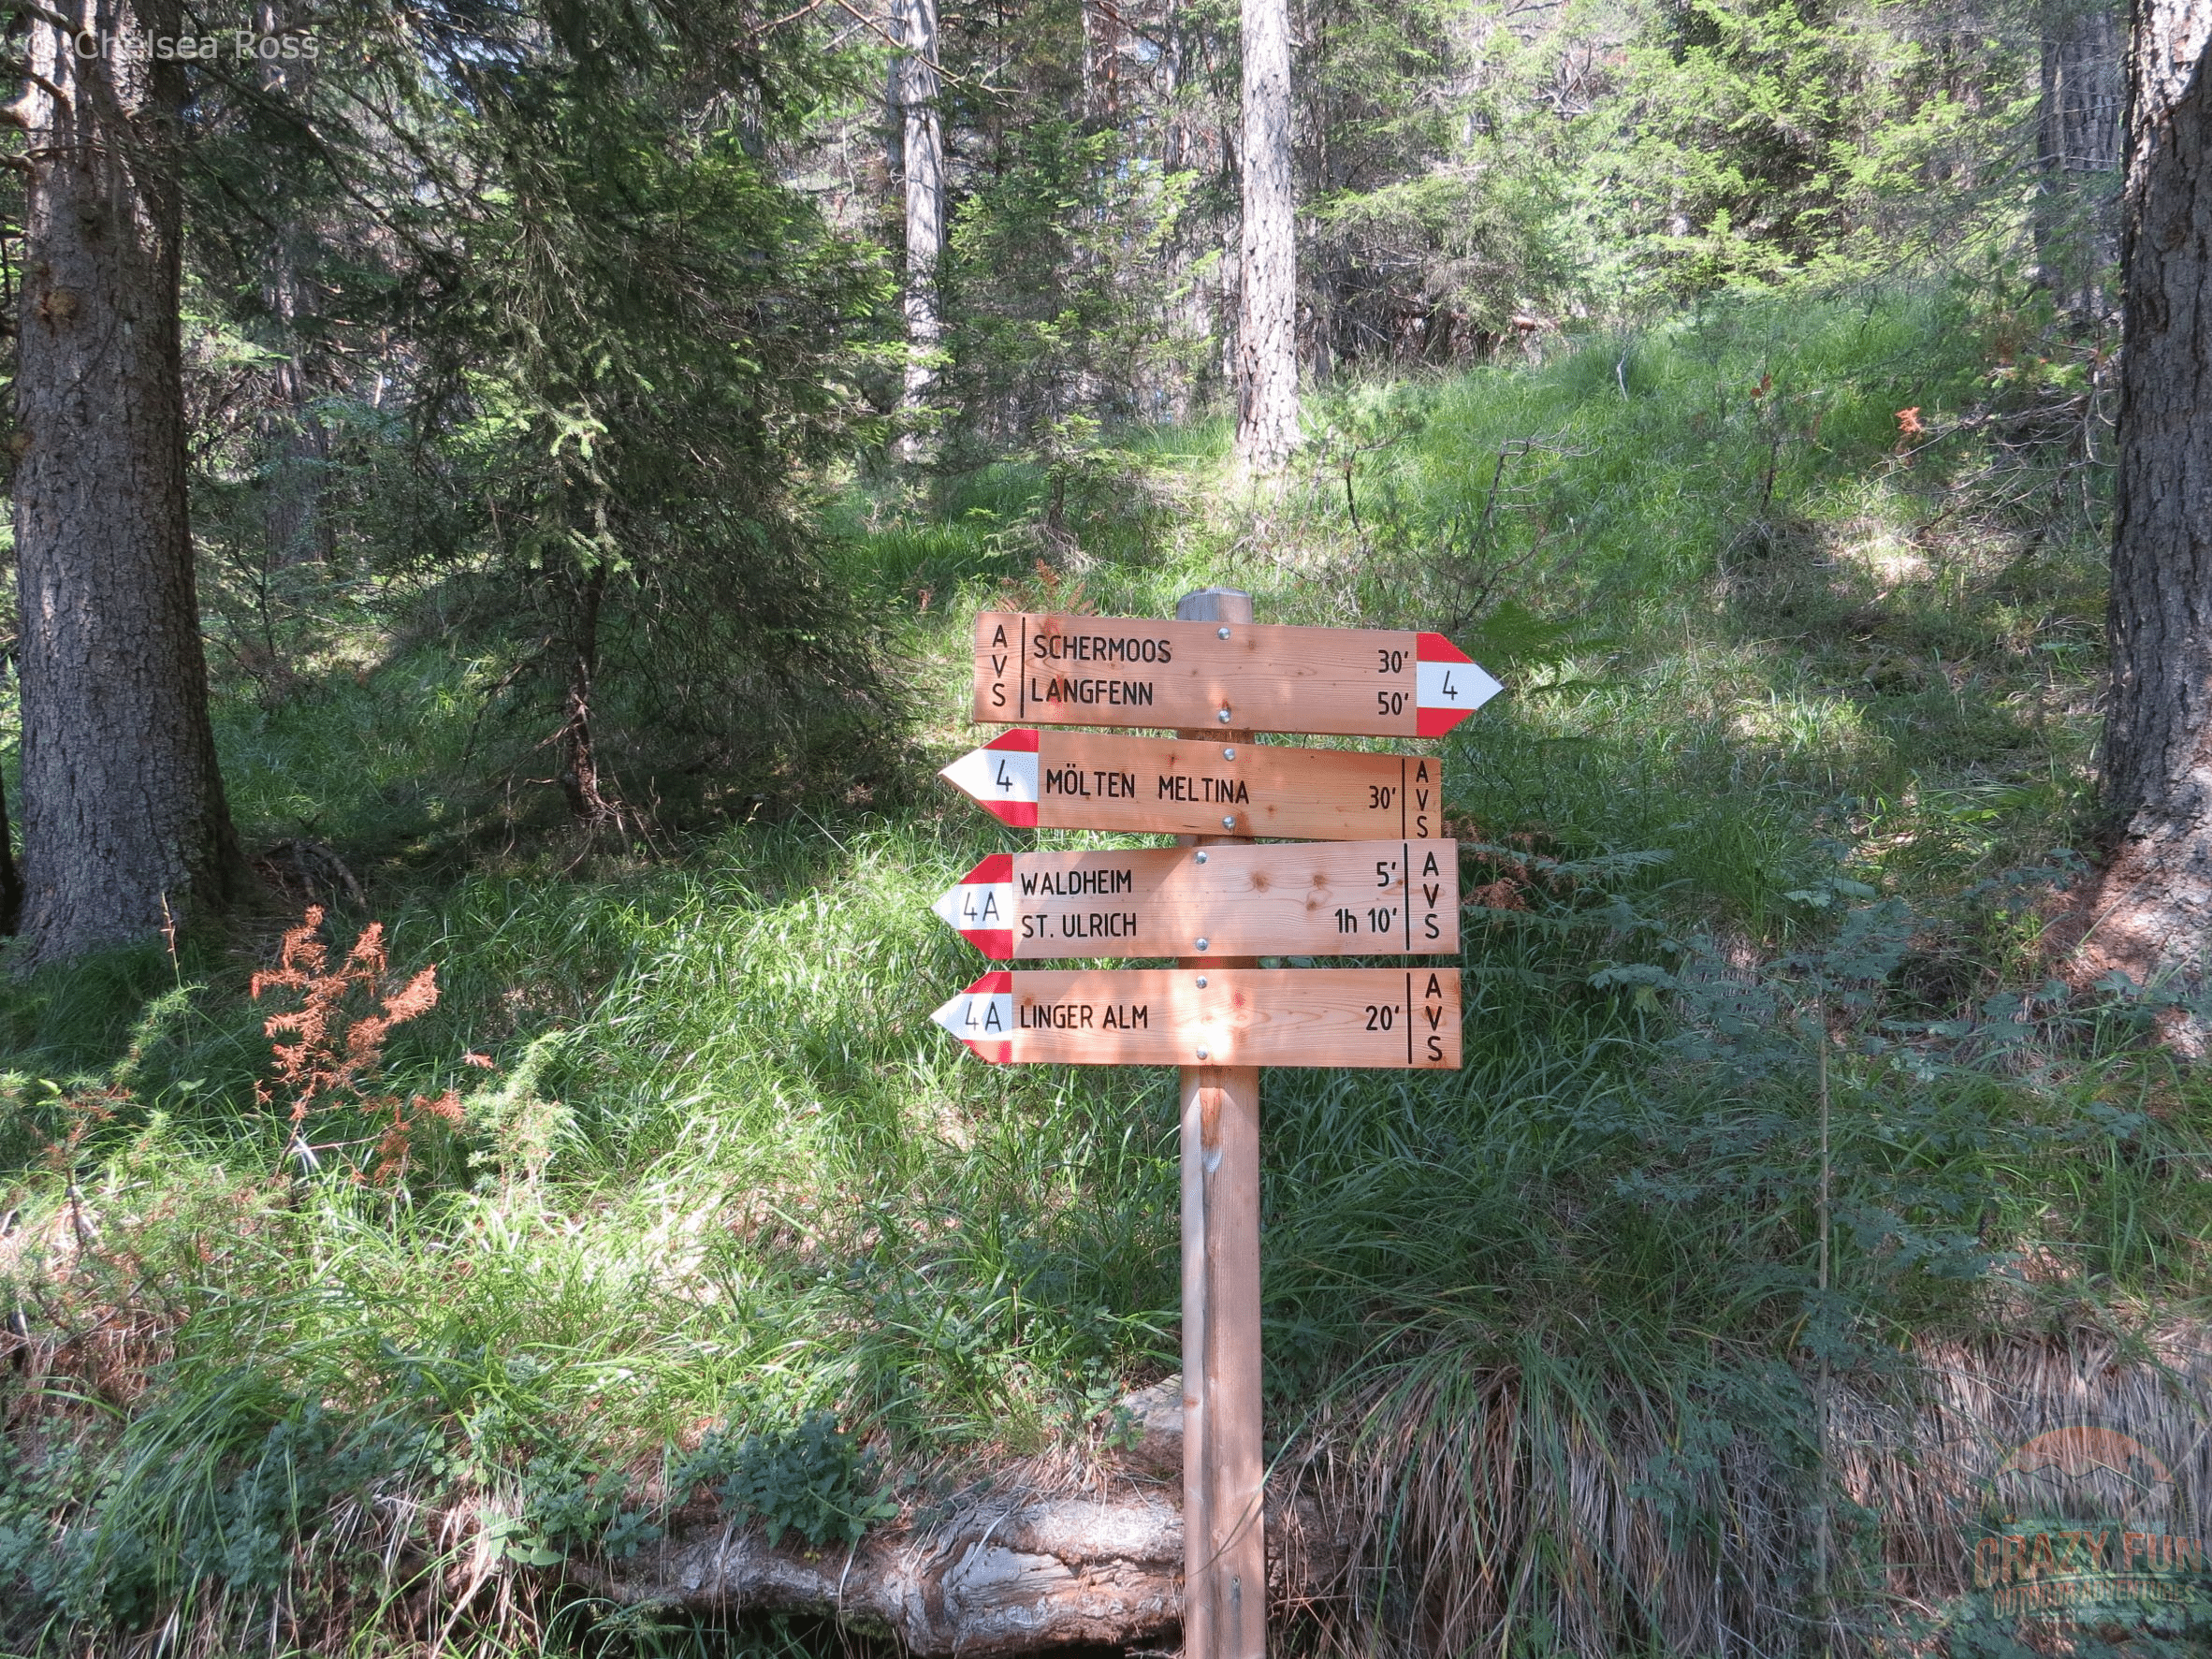 A wooden post indicating the direction for the hiking trails.